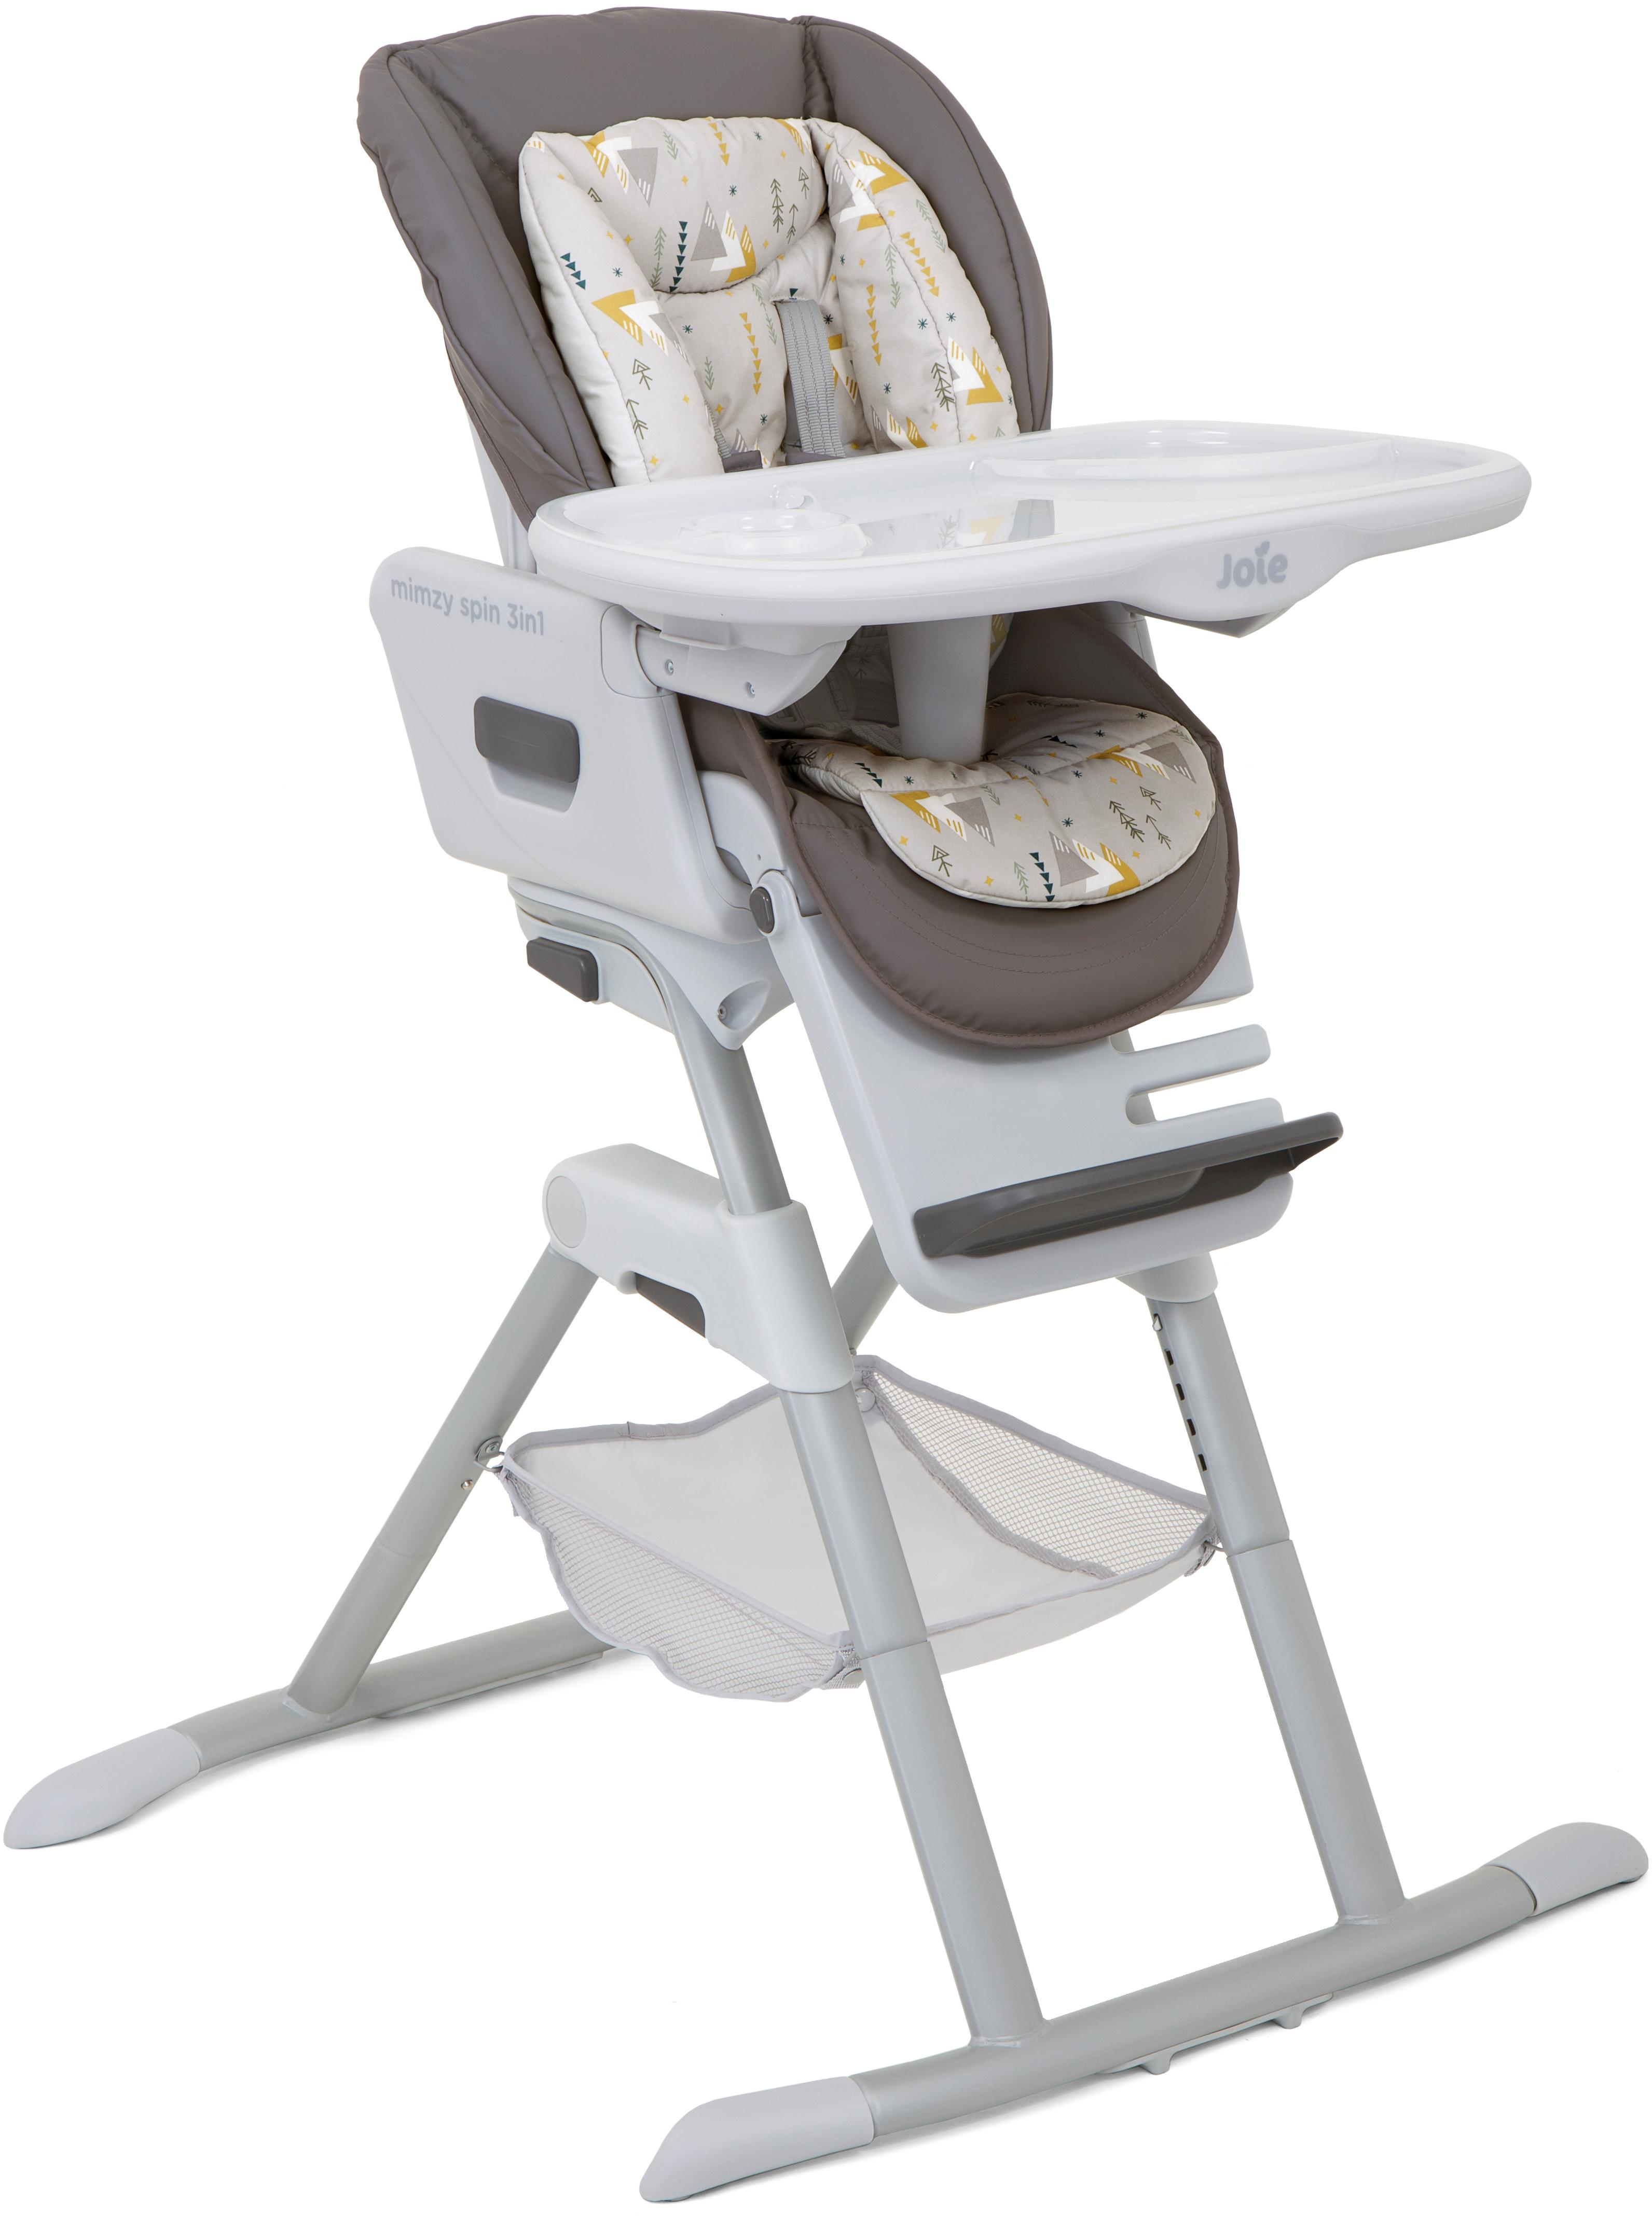 Joie Mimzy Spin 3 In 1 High Chair- Geometric Mountains